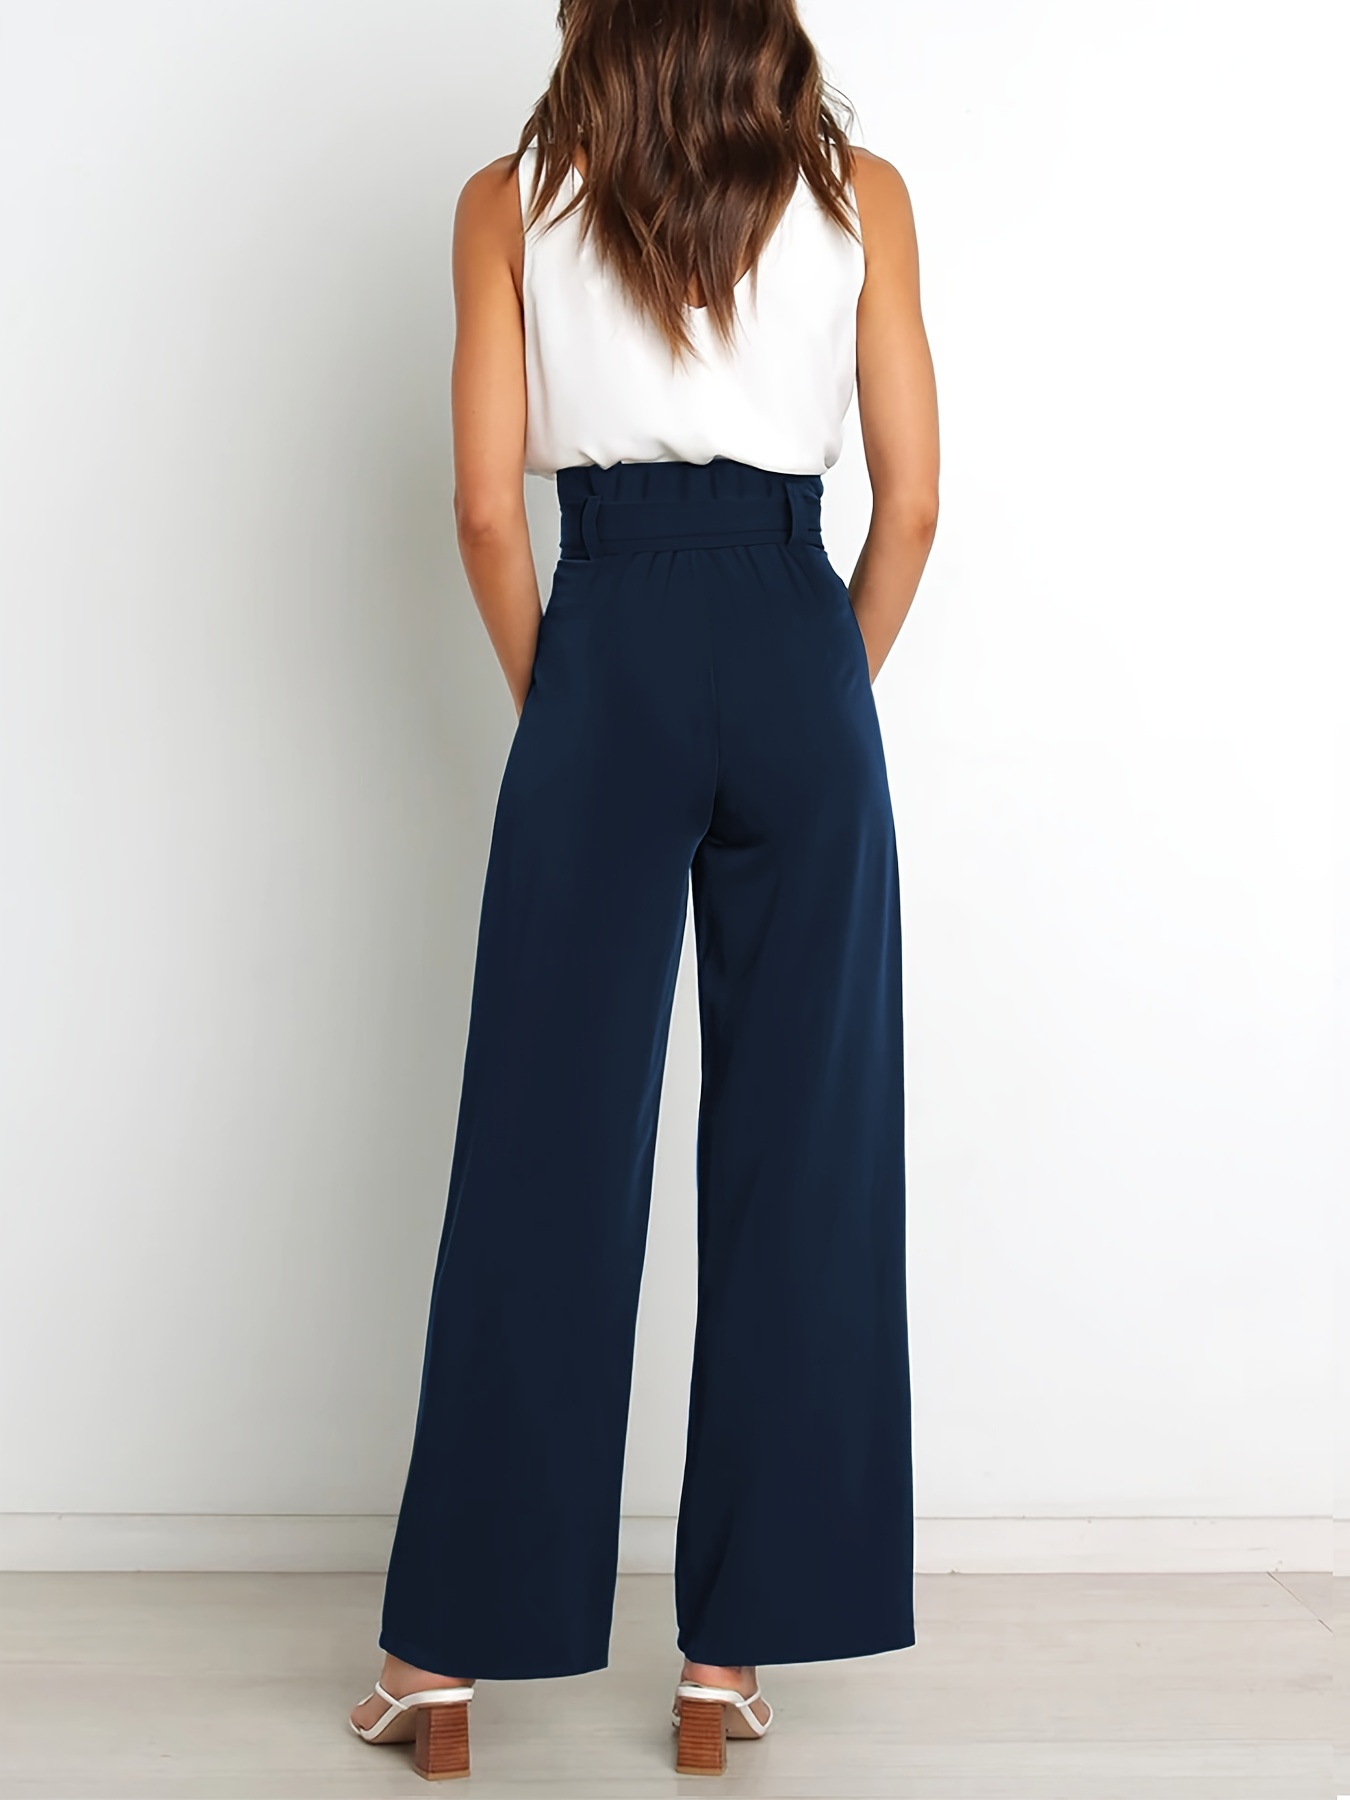 Fashion Women Casual Wide Leg Trousers Straight Trousers Loose Long Pants